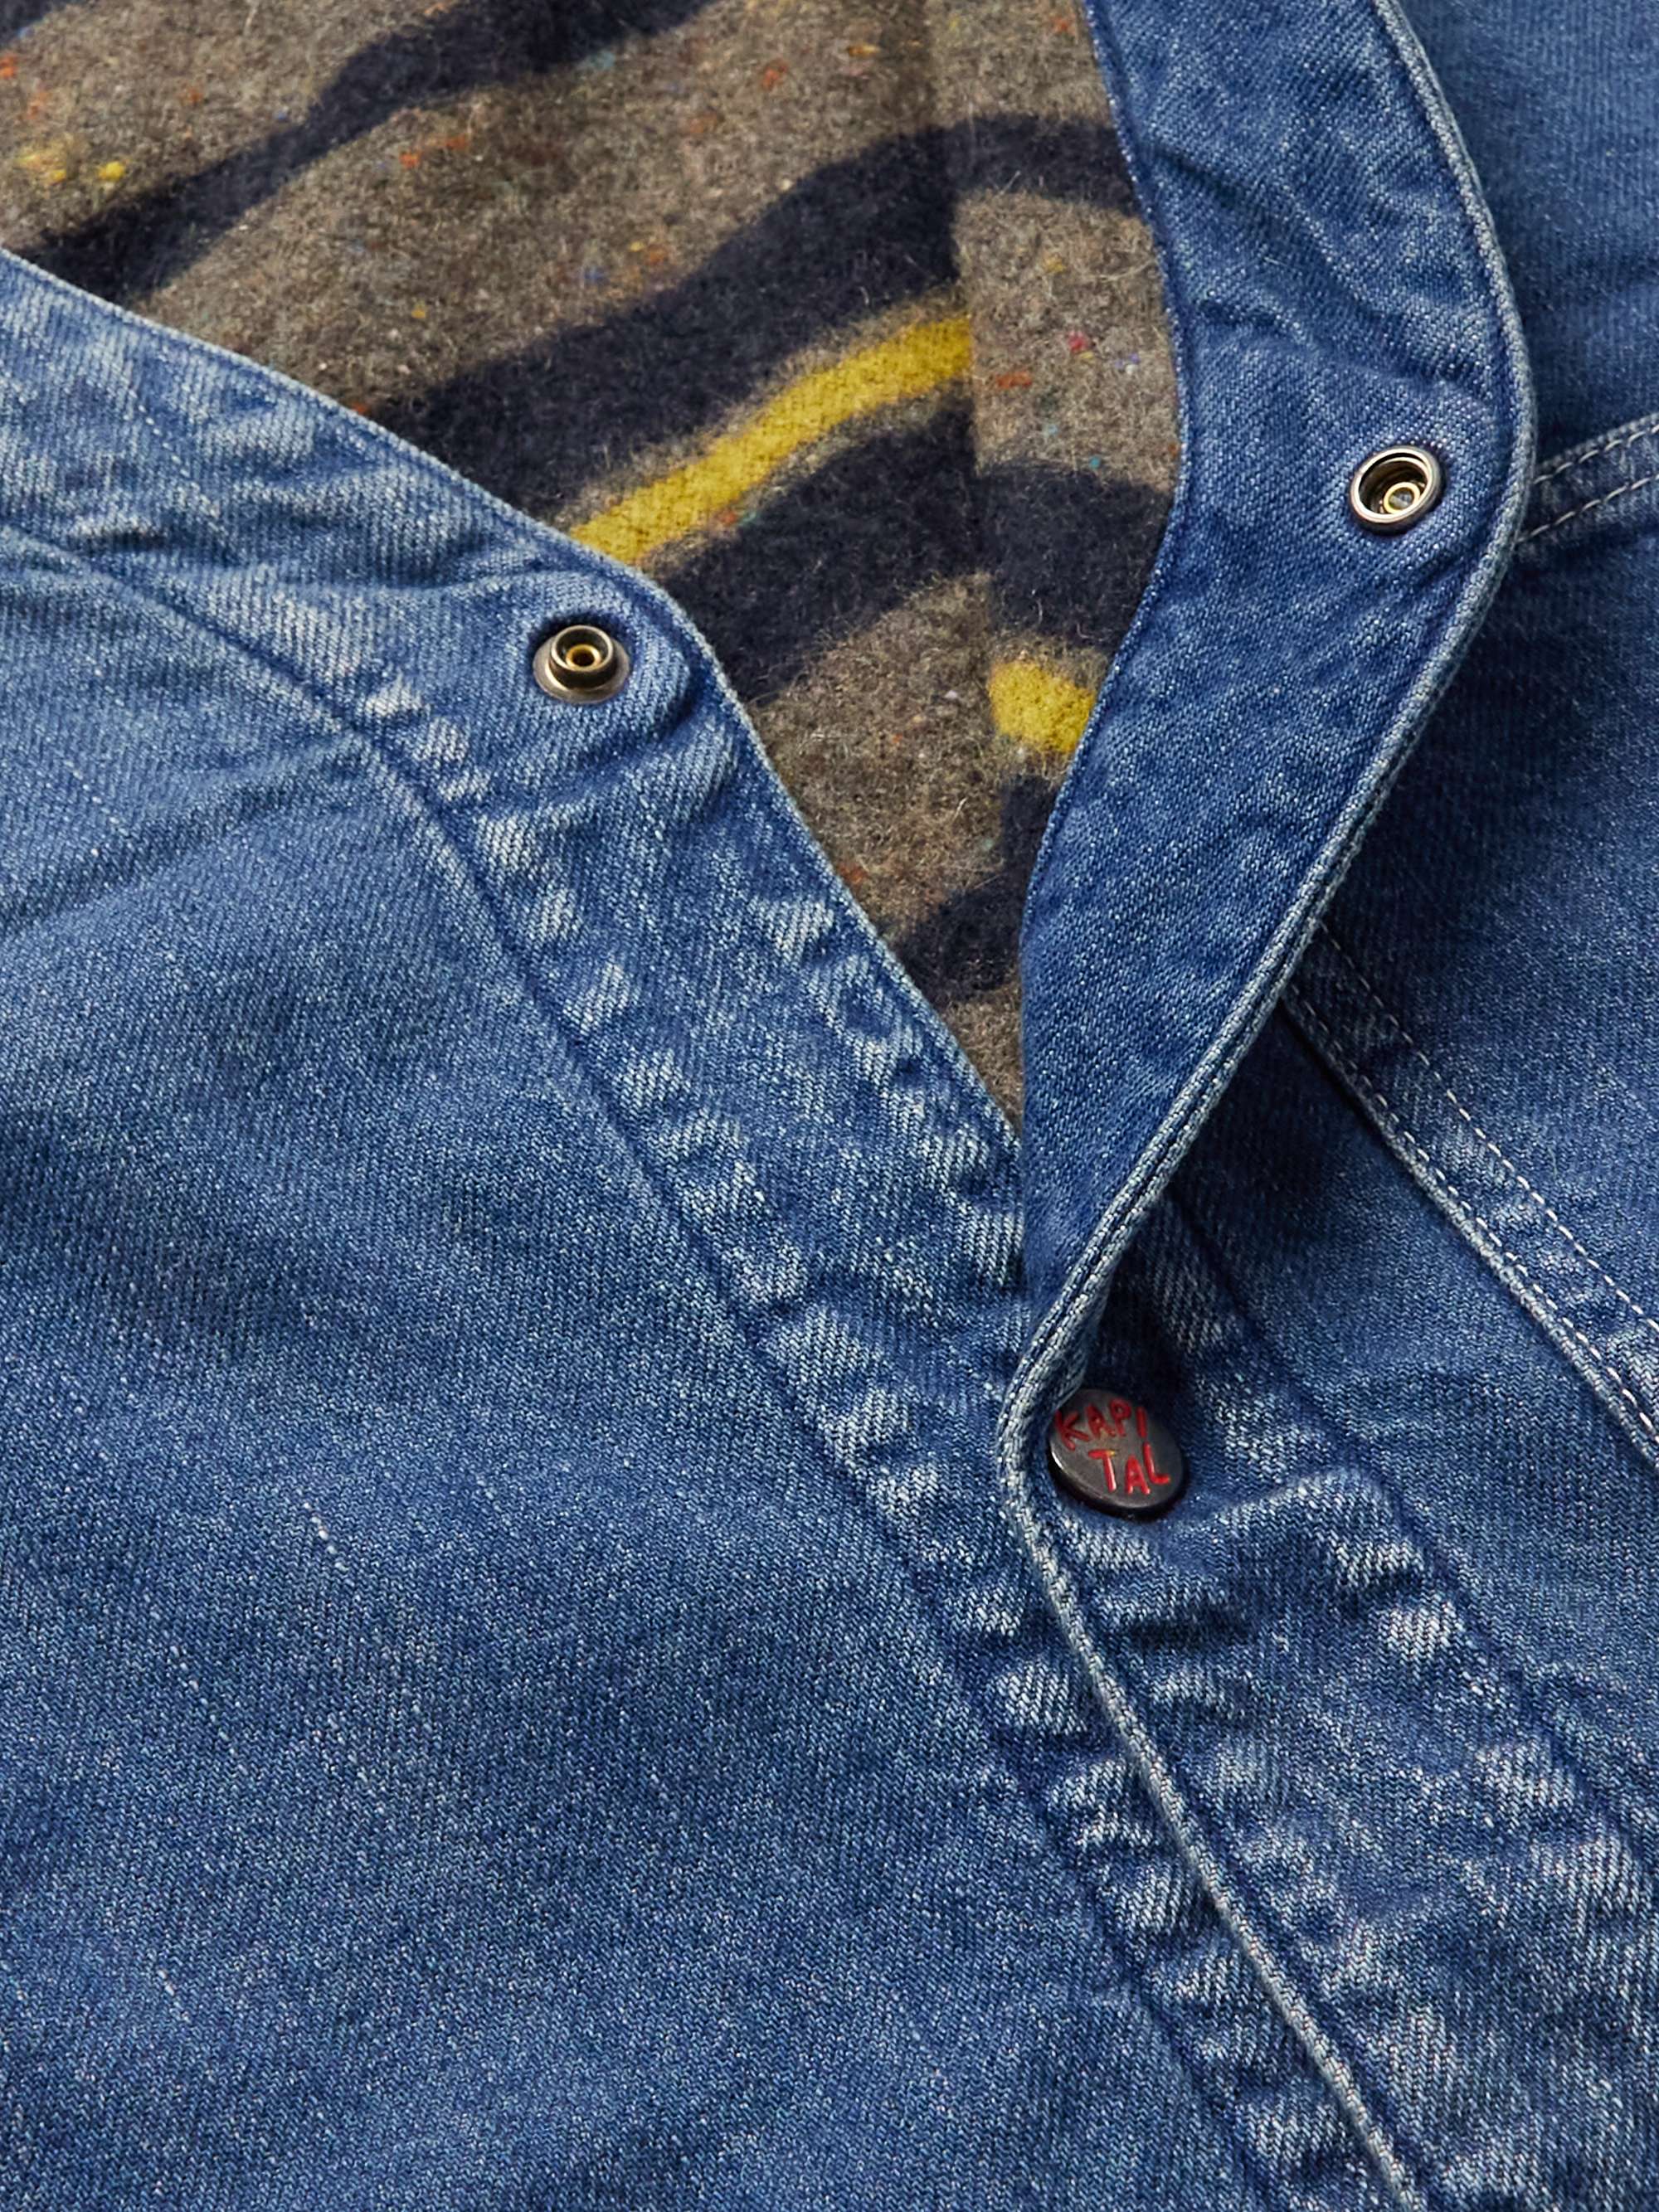 KAPITAL Coneybowy Reversible Denim and Striped Knitted Jacket